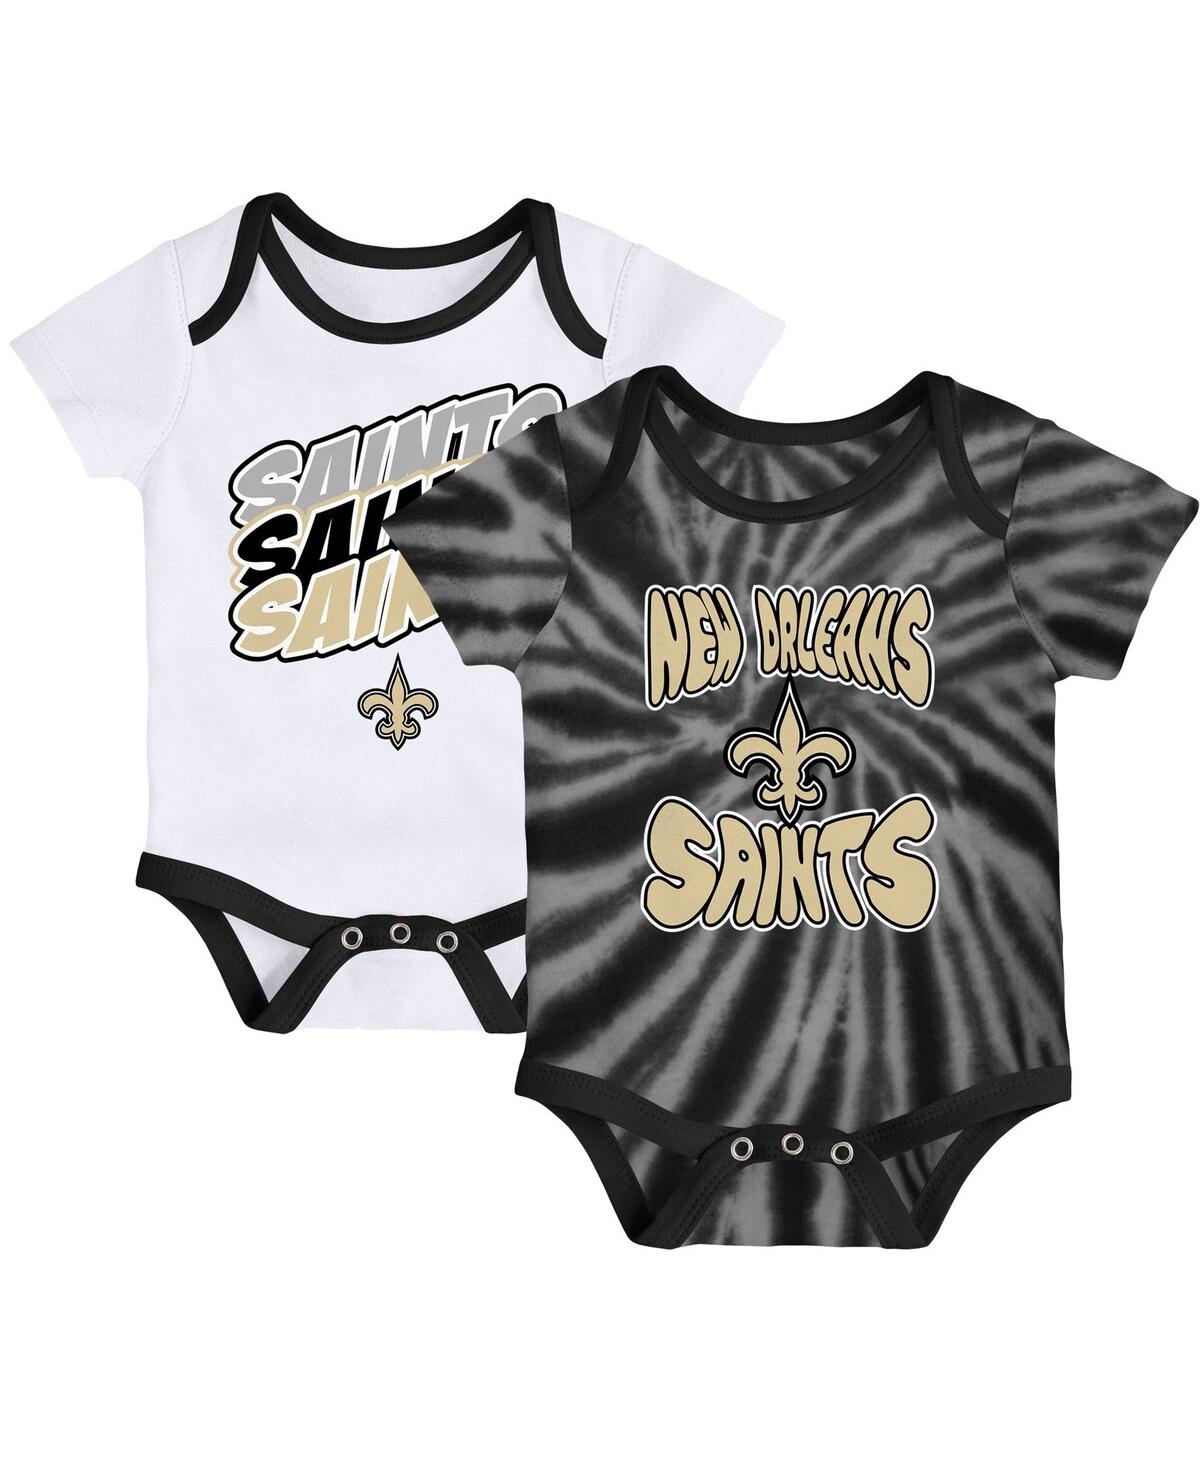 Outerstuff Babies' Newborn And Infant Boys And Girls Black, White New Orleans Saints Monterey Tie-dye 2-pack Bodysuit S In Black,white